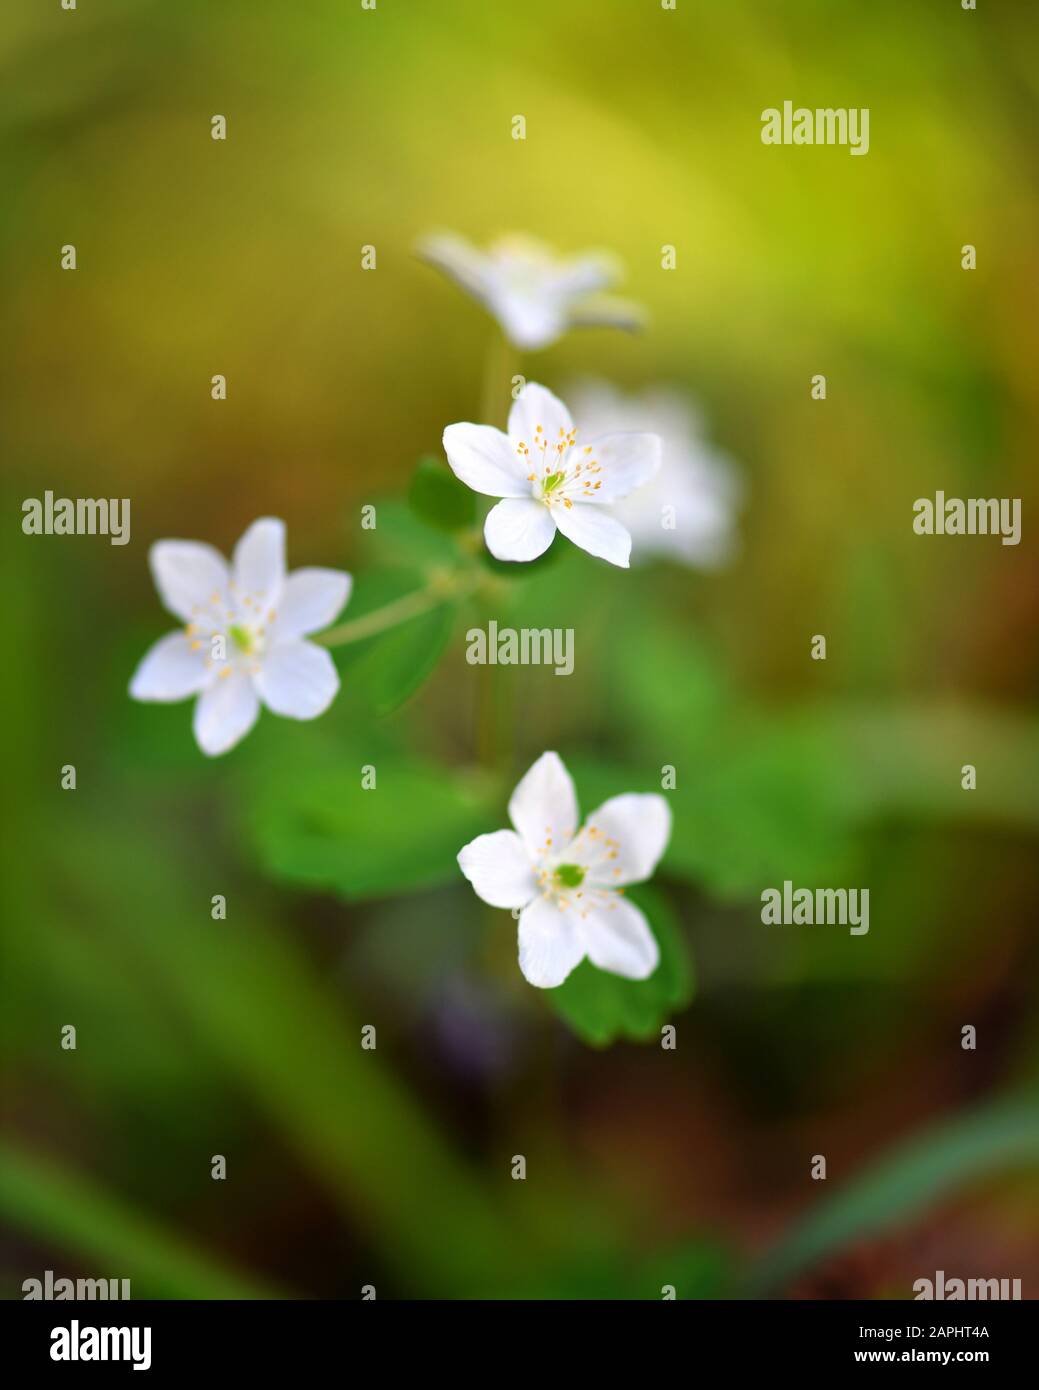 Spring flower close-up. Isopyrum thalictroides. Stock Photo